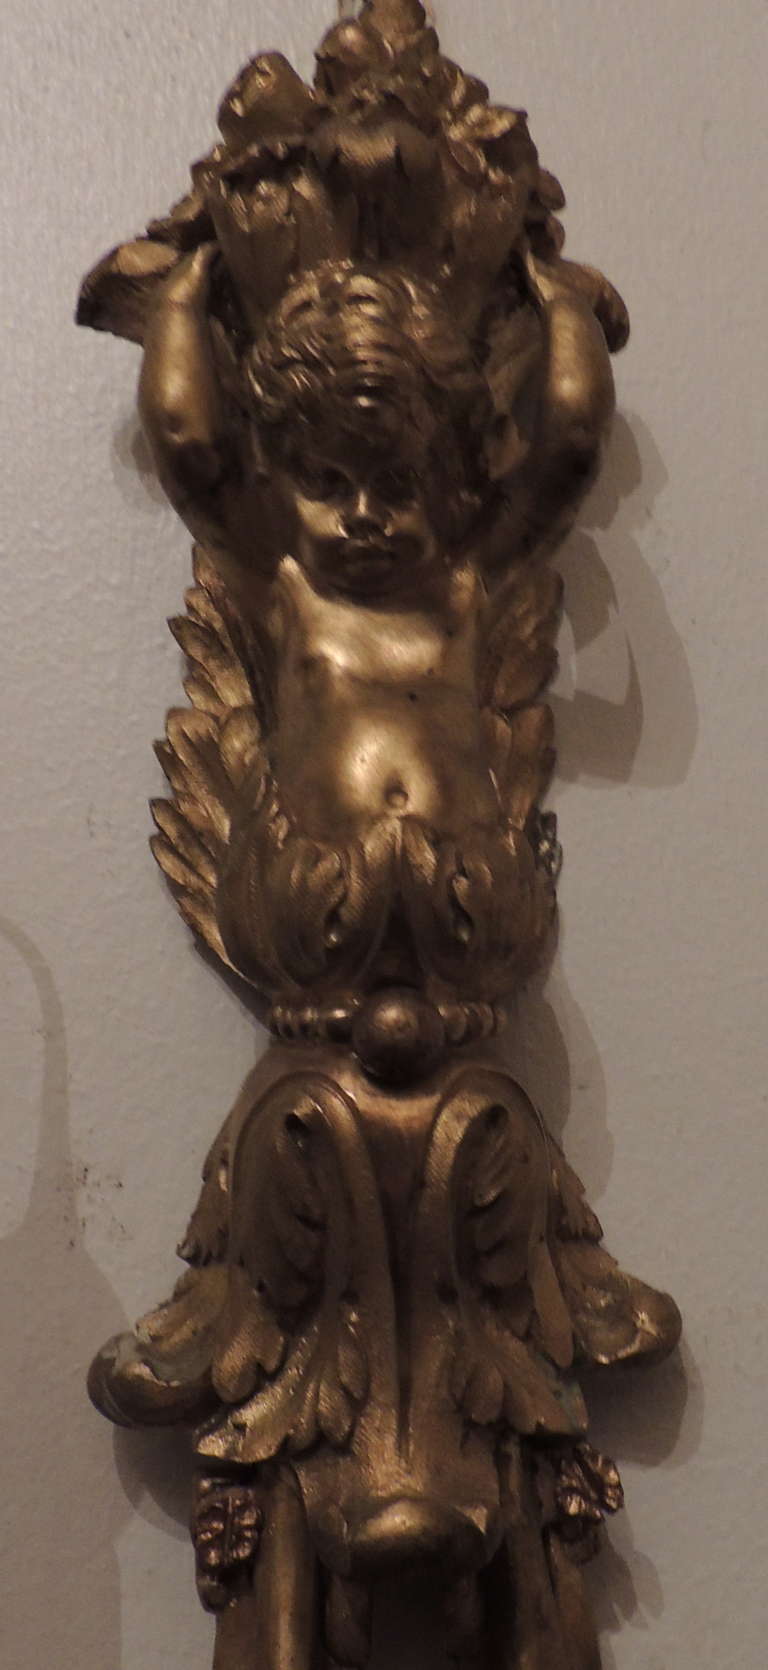 Baroque Exquisite Pair Of Large Dore Bronze Cherub Putti Wall Sconces By E.F. Caldwell